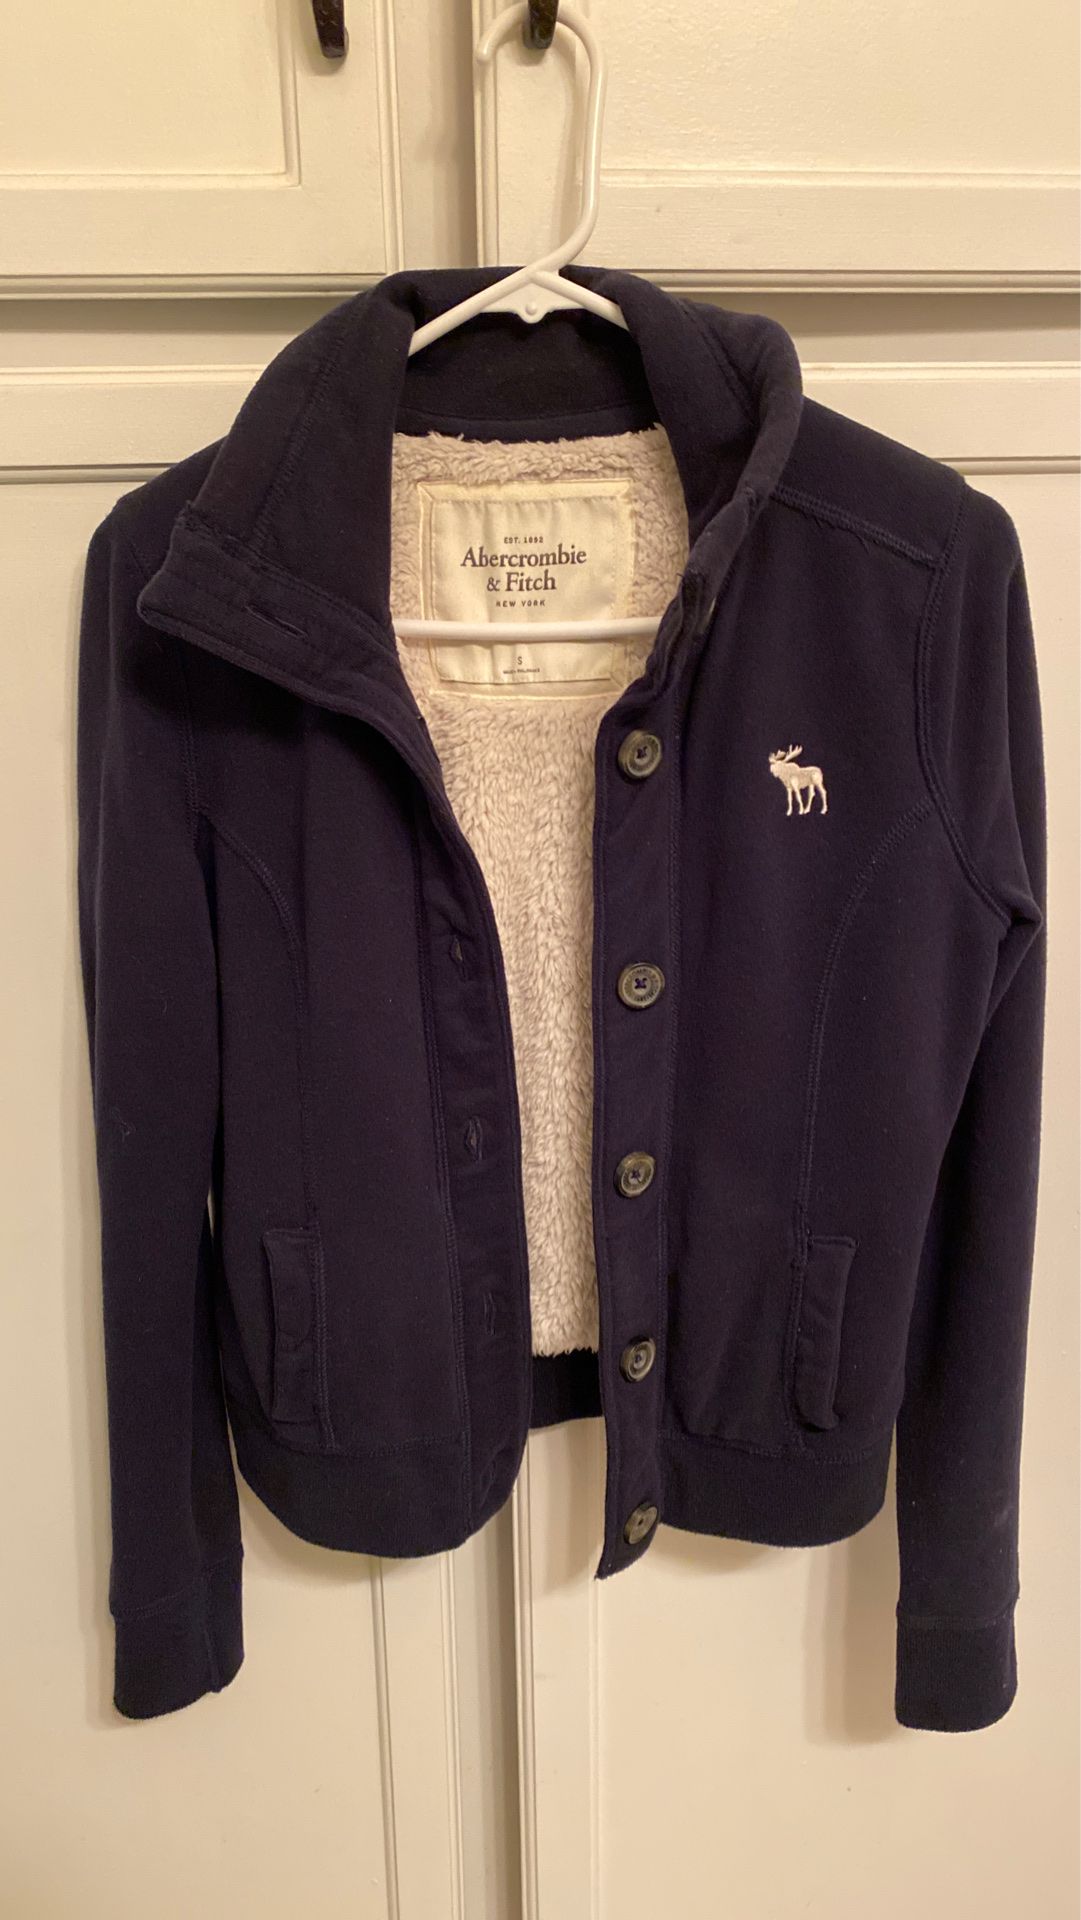 Abercrombie & Fitch jacket